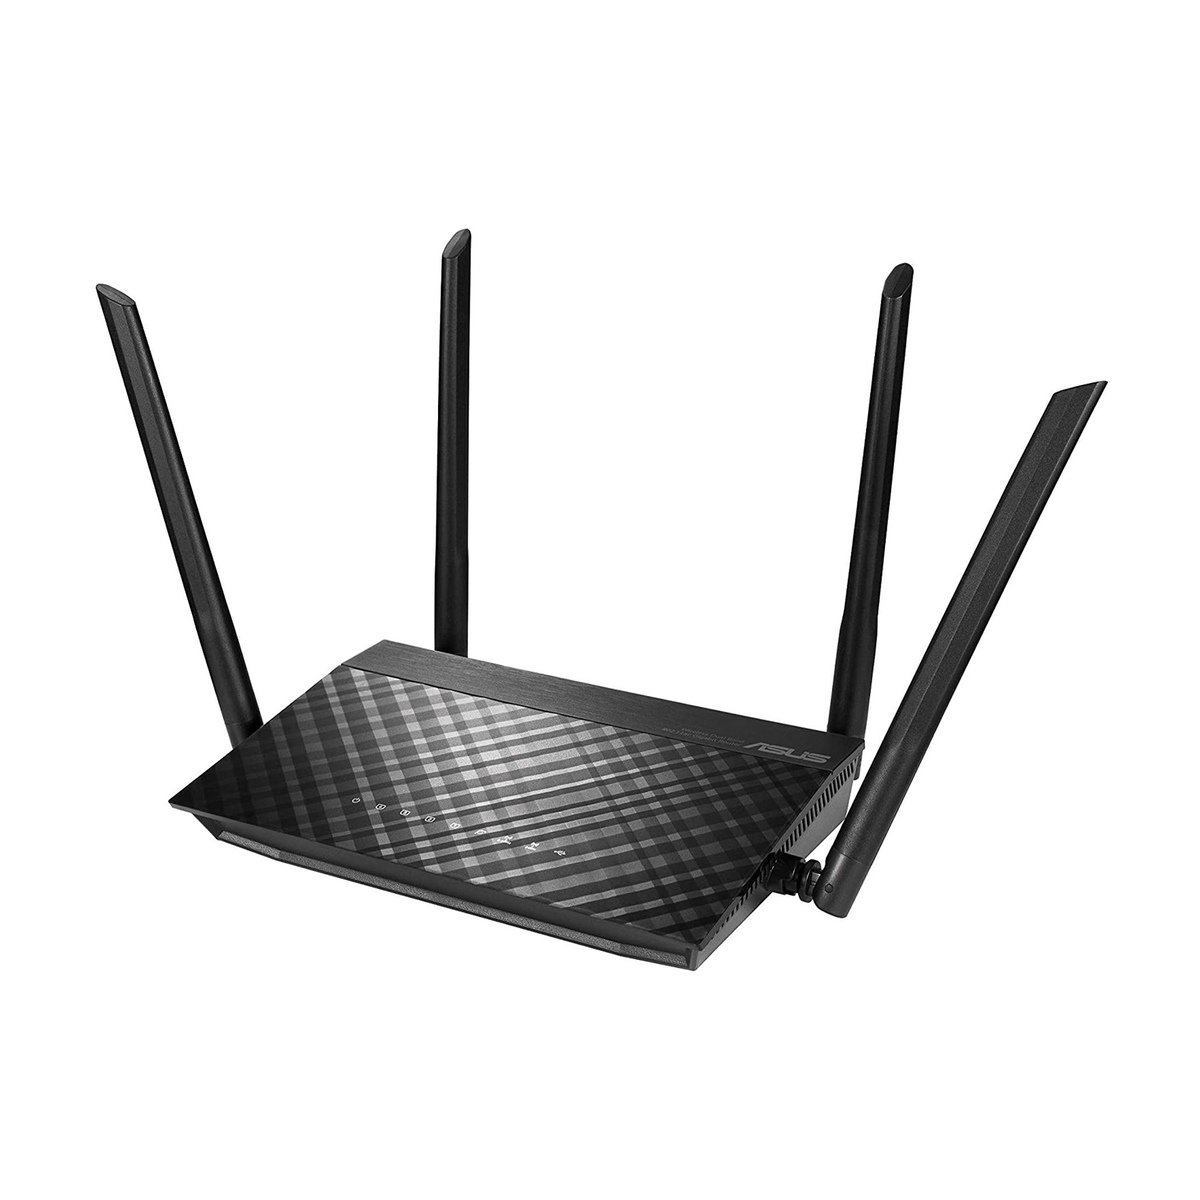 ASUS RT-AC59U AC1500 Dual Band WiFi Router